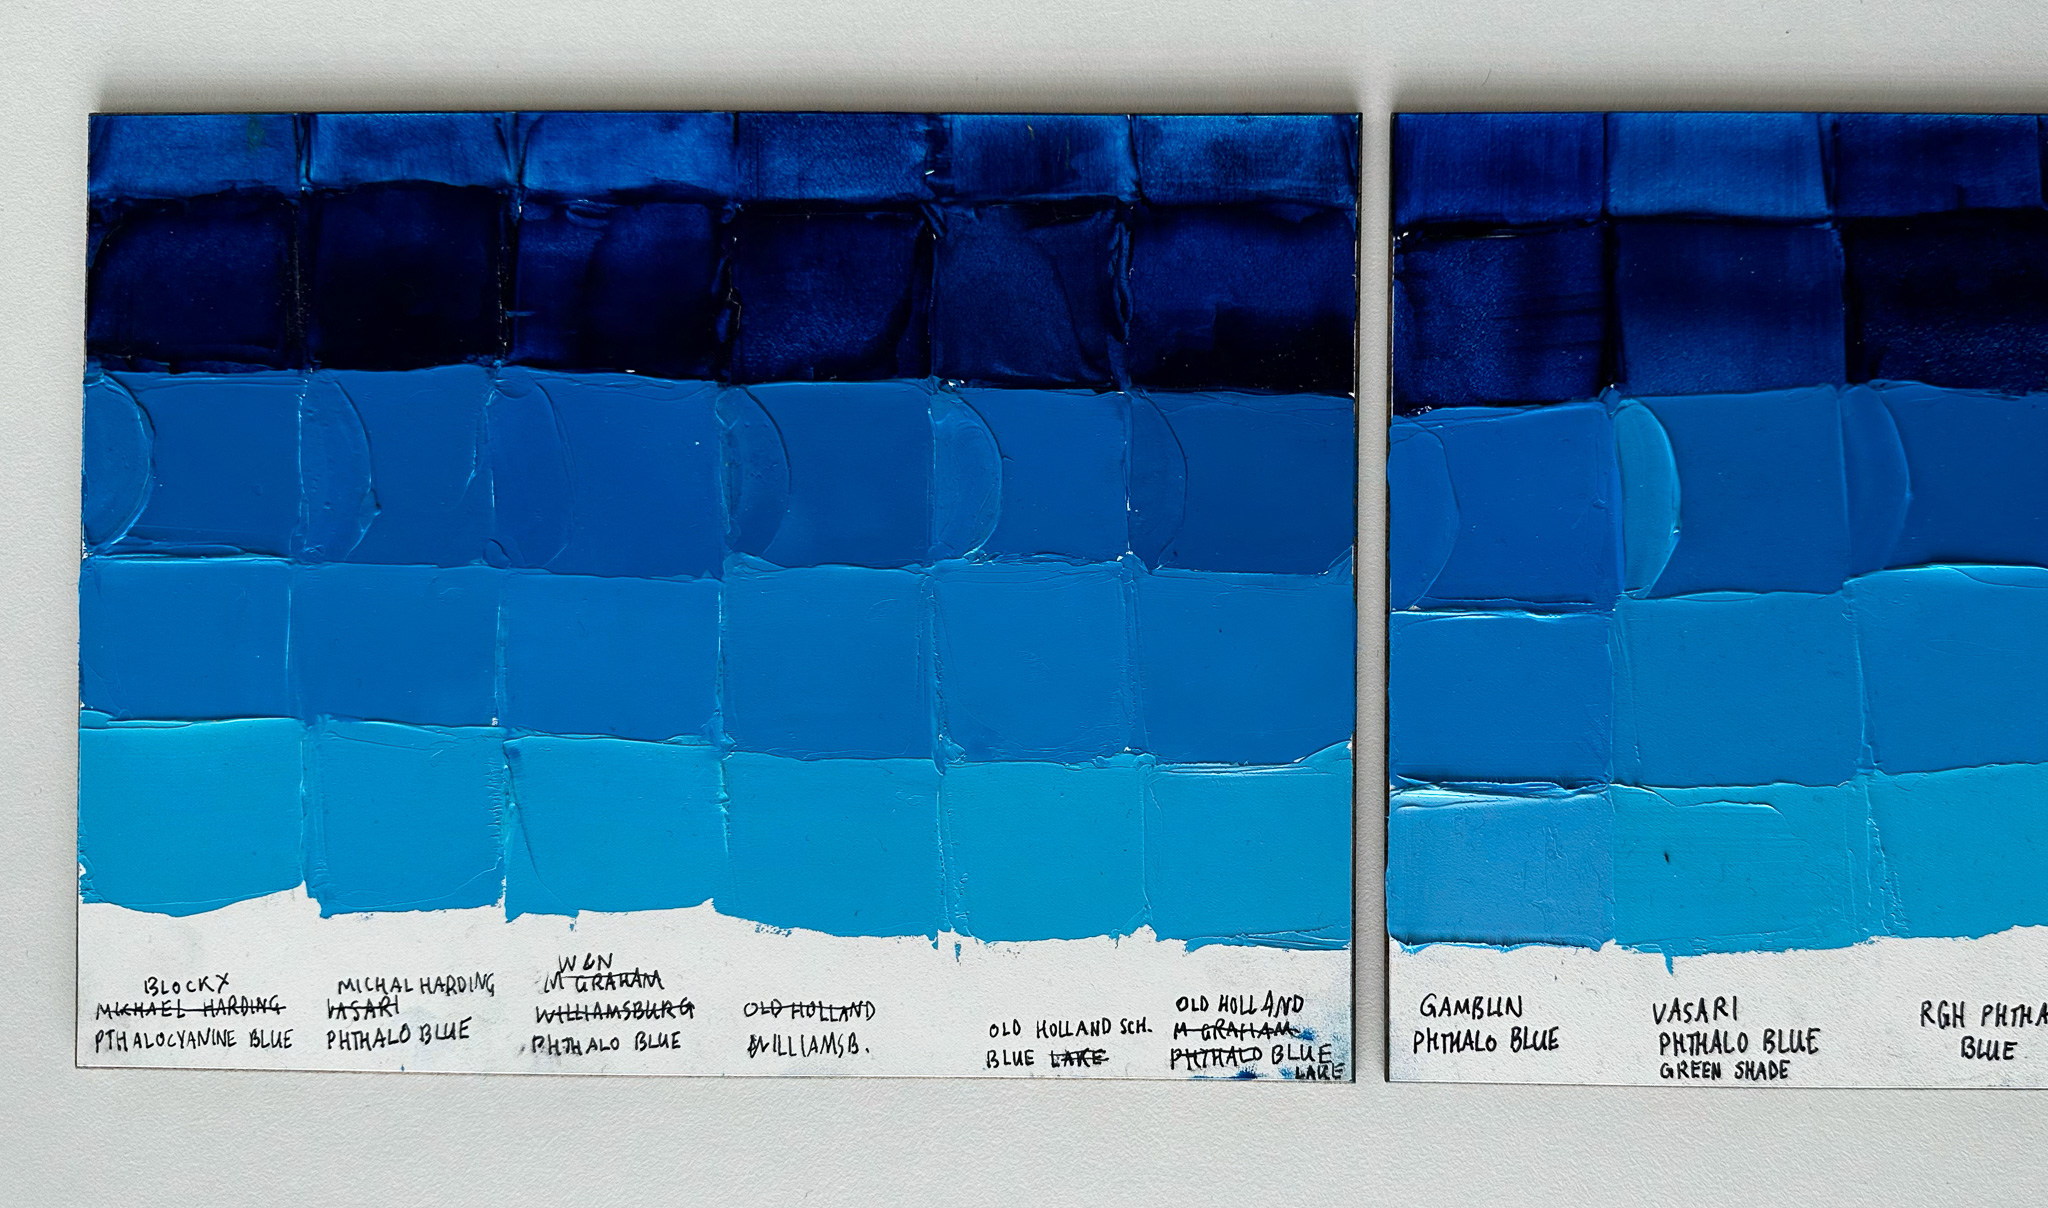 Paint swatch comparisons of Phthalo Blue PB15 3 exploring differences between the colors when mixed with white. These panels show a variety of colors in addition to the paints featured in the article 